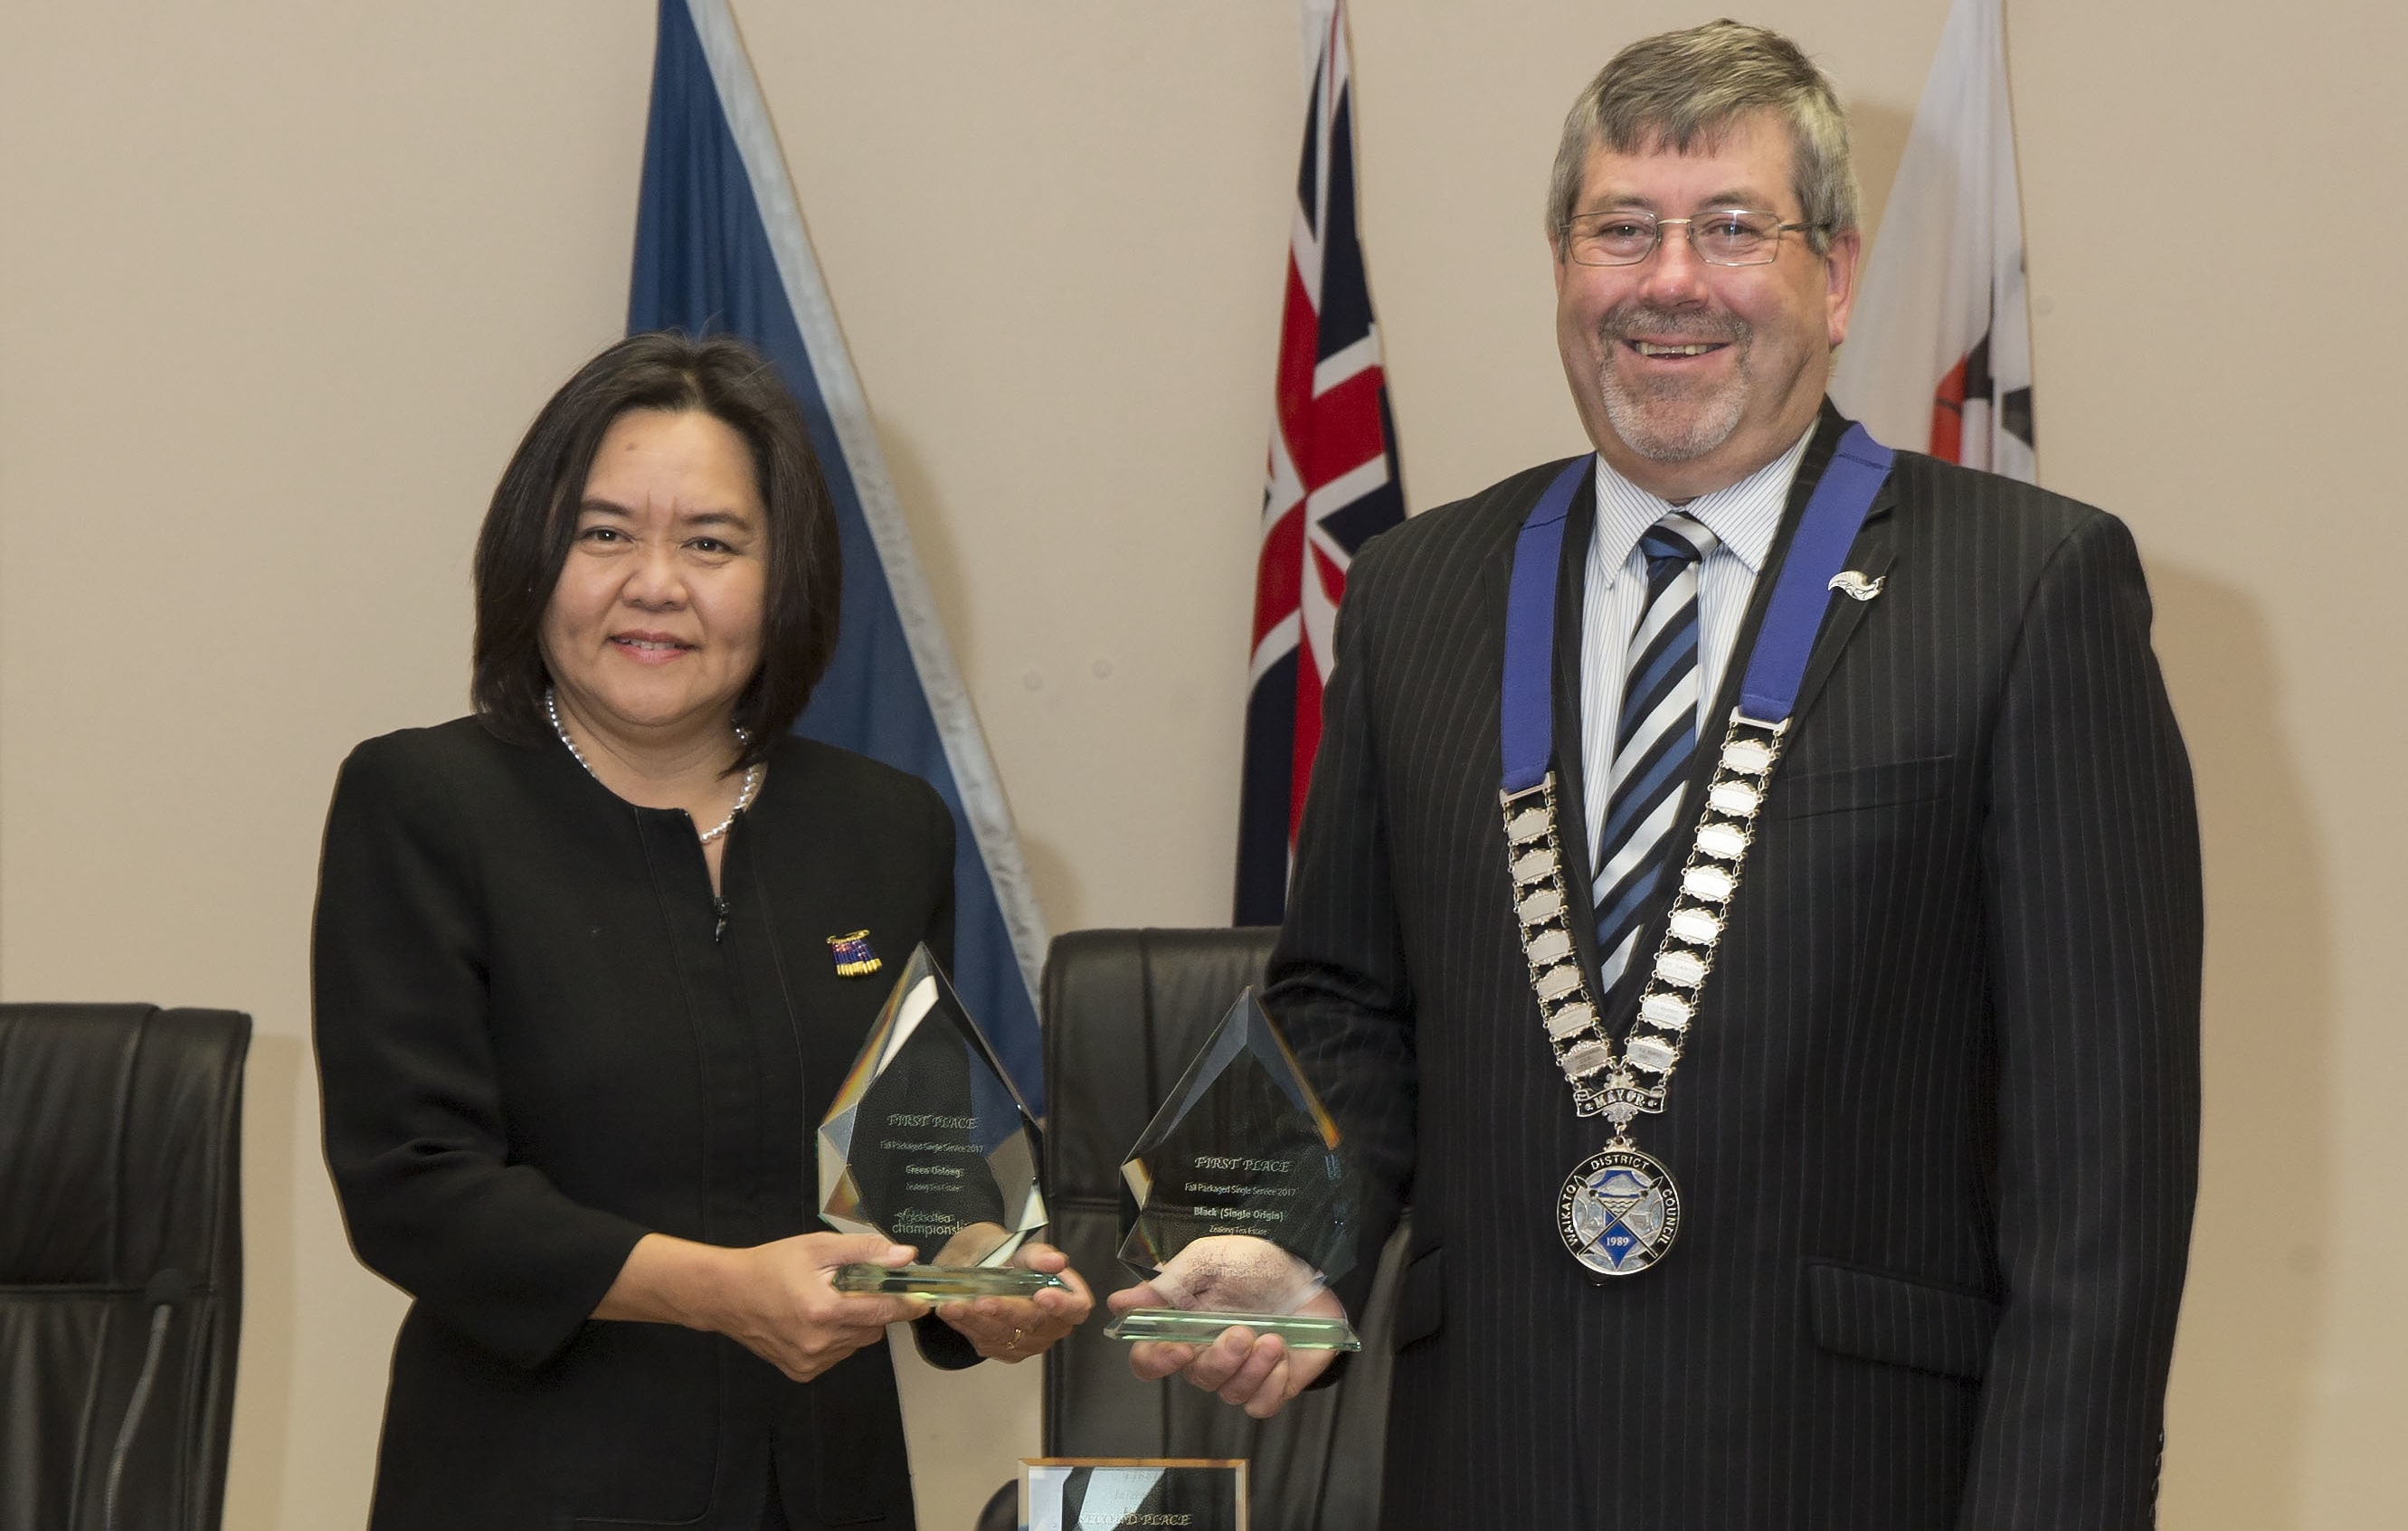 Gigi Crawford of Zealong Tea Estate and Mayor Allan Sanson of Waikato District Council, with the three trophies won by Zealong Tea Estate